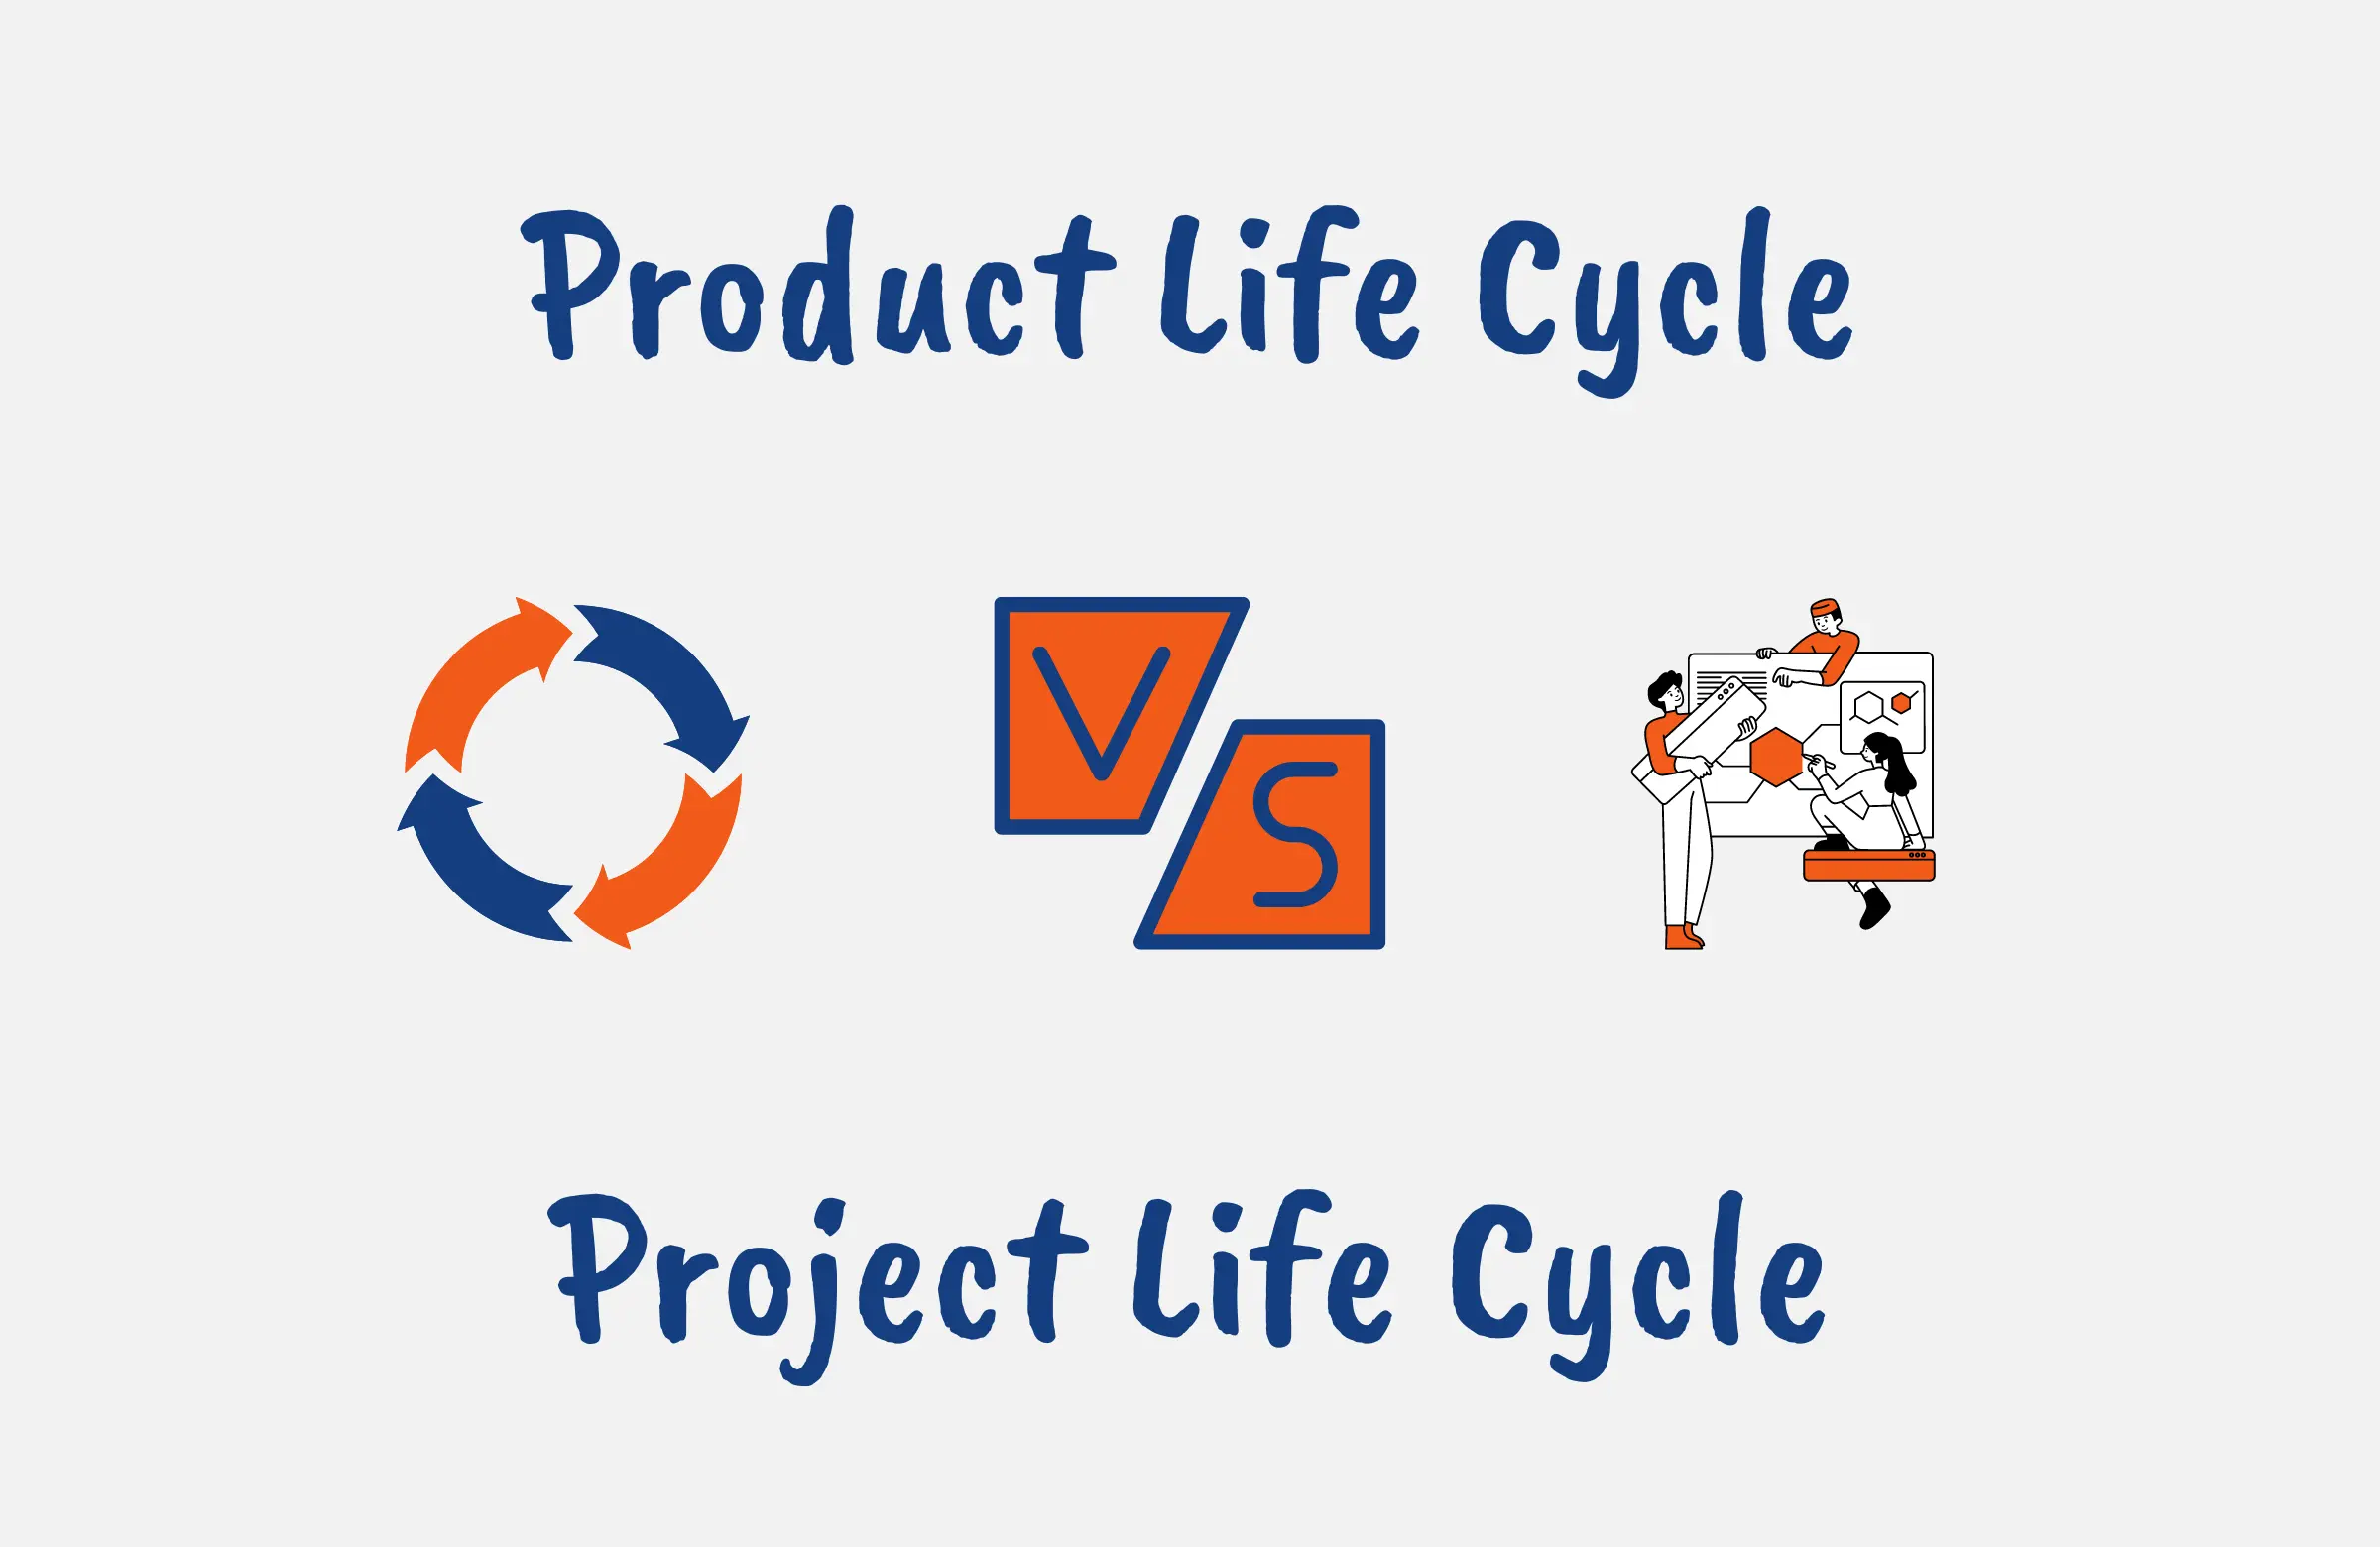 Difference Between the Product Life Cycle and Project Life Cycle